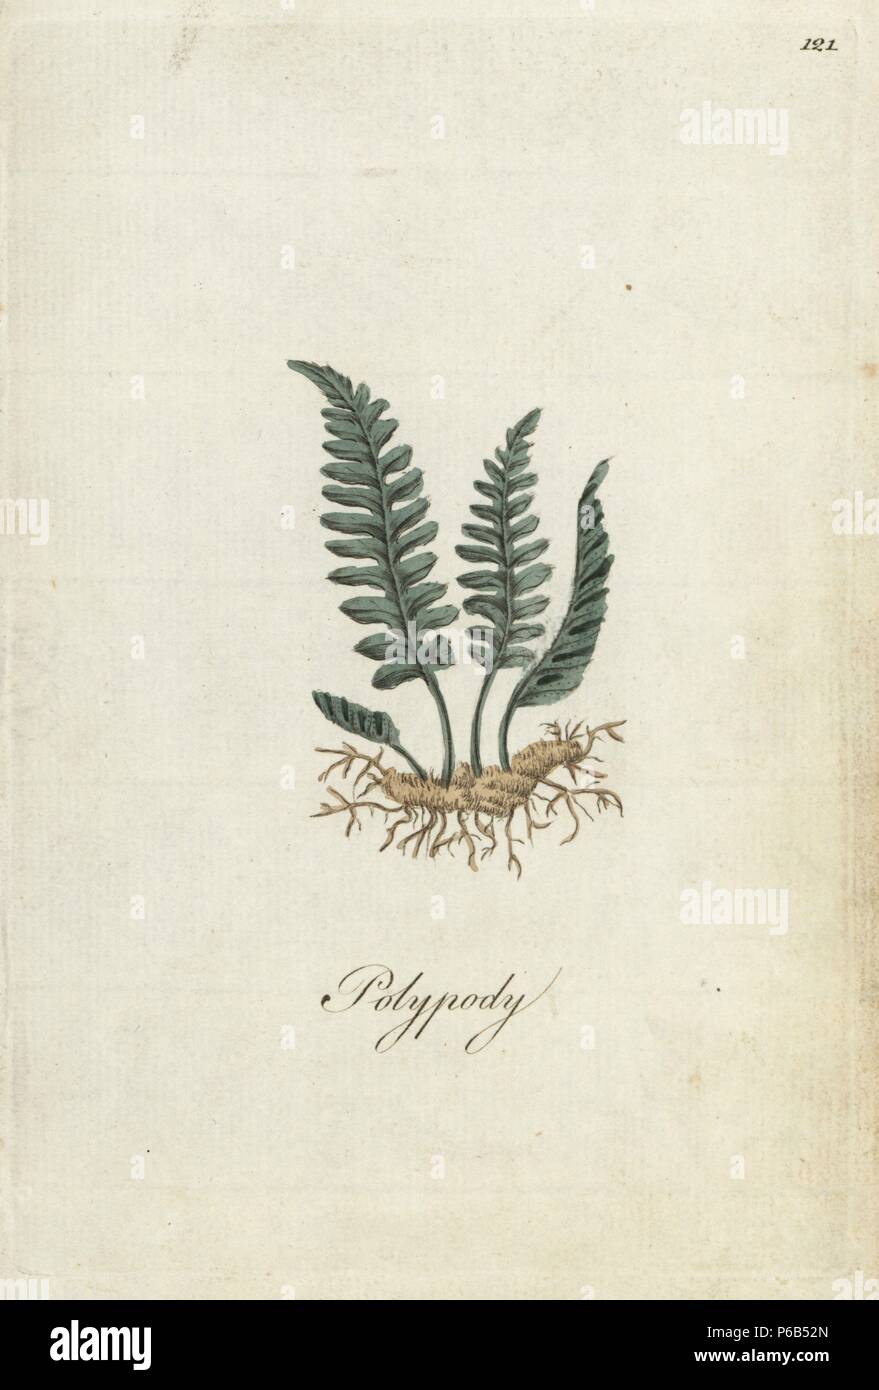 Polypody fern, Polypodium officinalis. Handcoloured botanical copperplate engraving by an unknown artist from 'Culpeper's English Family Physician; or Medical Herbal Enlarged, with Several Hundred Additional Plants, Principally from Sir John Hill,' by Joshua Hamilton, London, W. Locke, 1792. Stock Photo